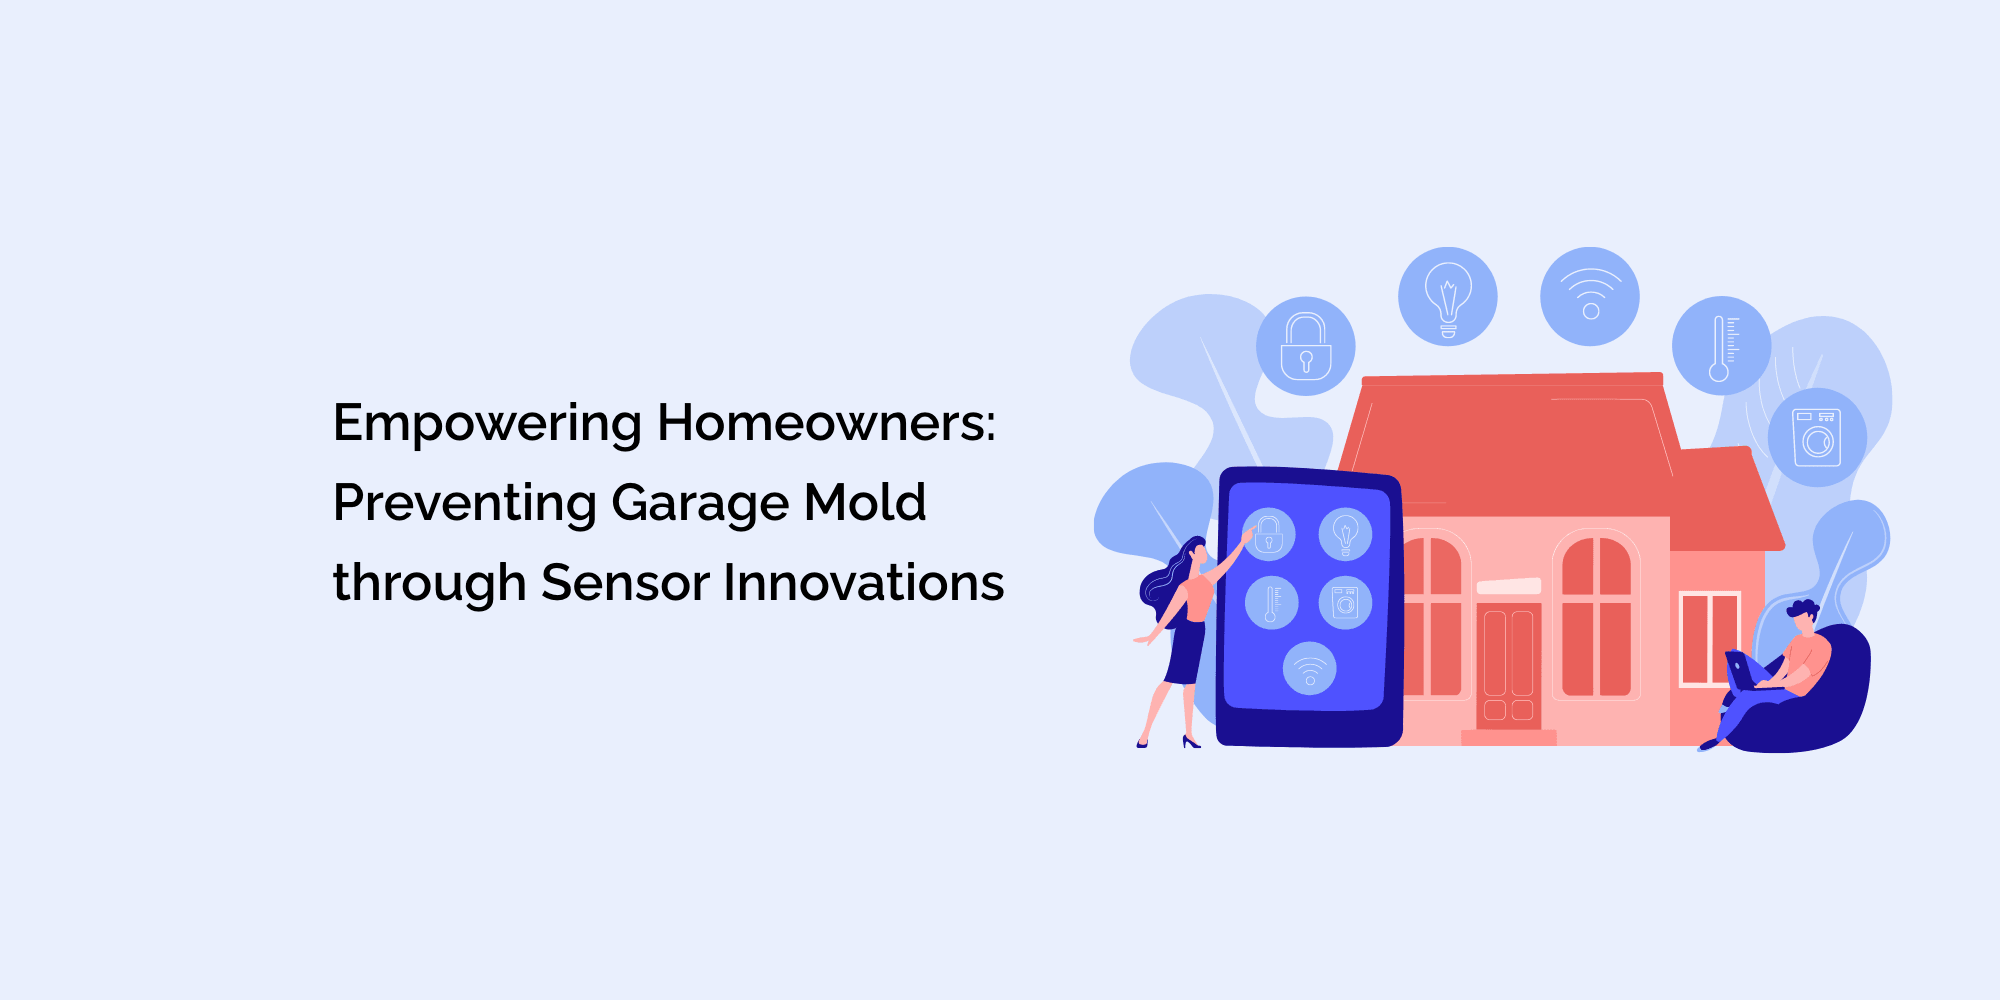 Empowering Homeowners: Preventing Garage Mold through Sensor Innovations